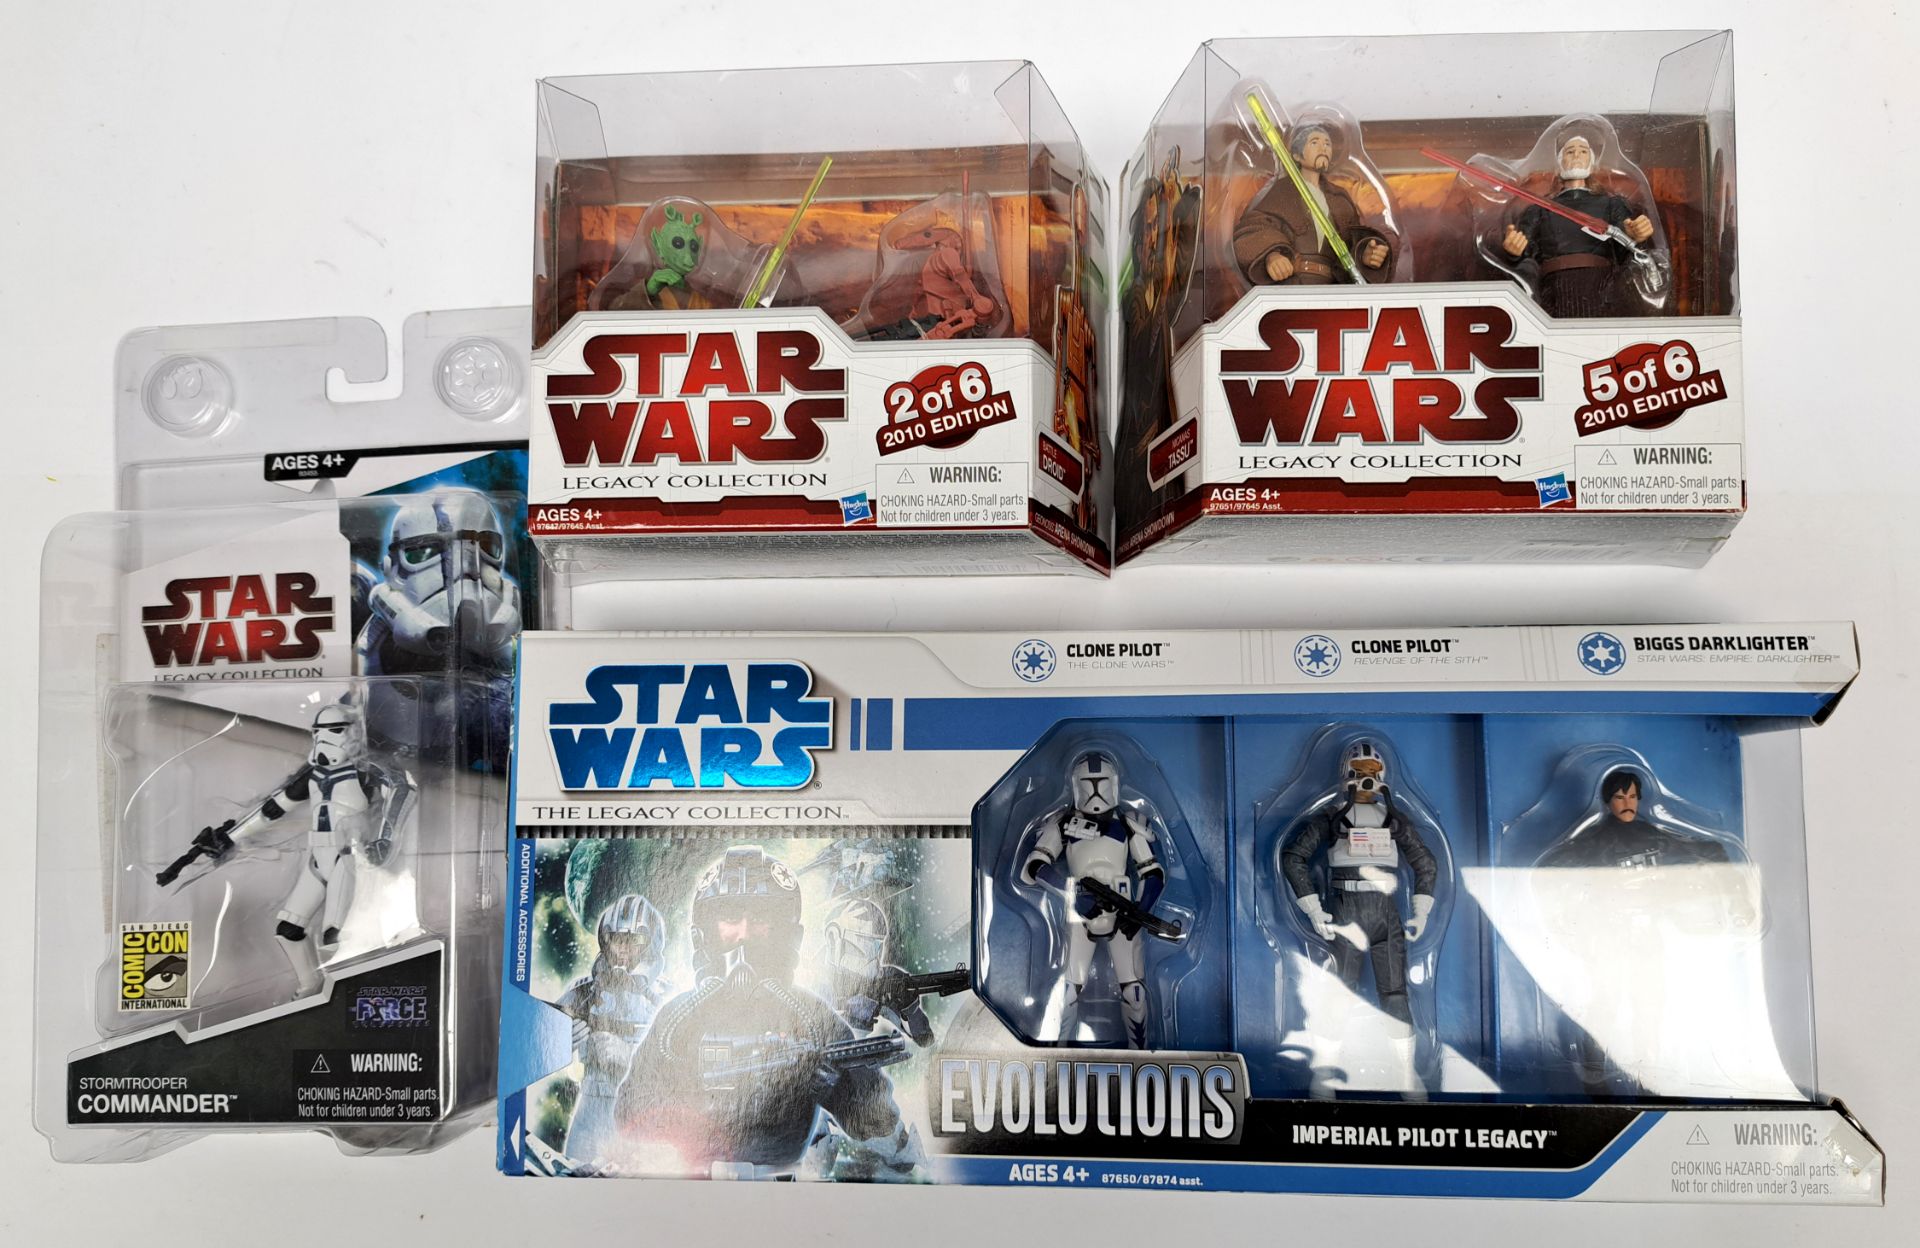 Hasbro Star Wars Legacy Collection Imperial Pilot Evolutions, Stormtrooper Commander in mixed lot...